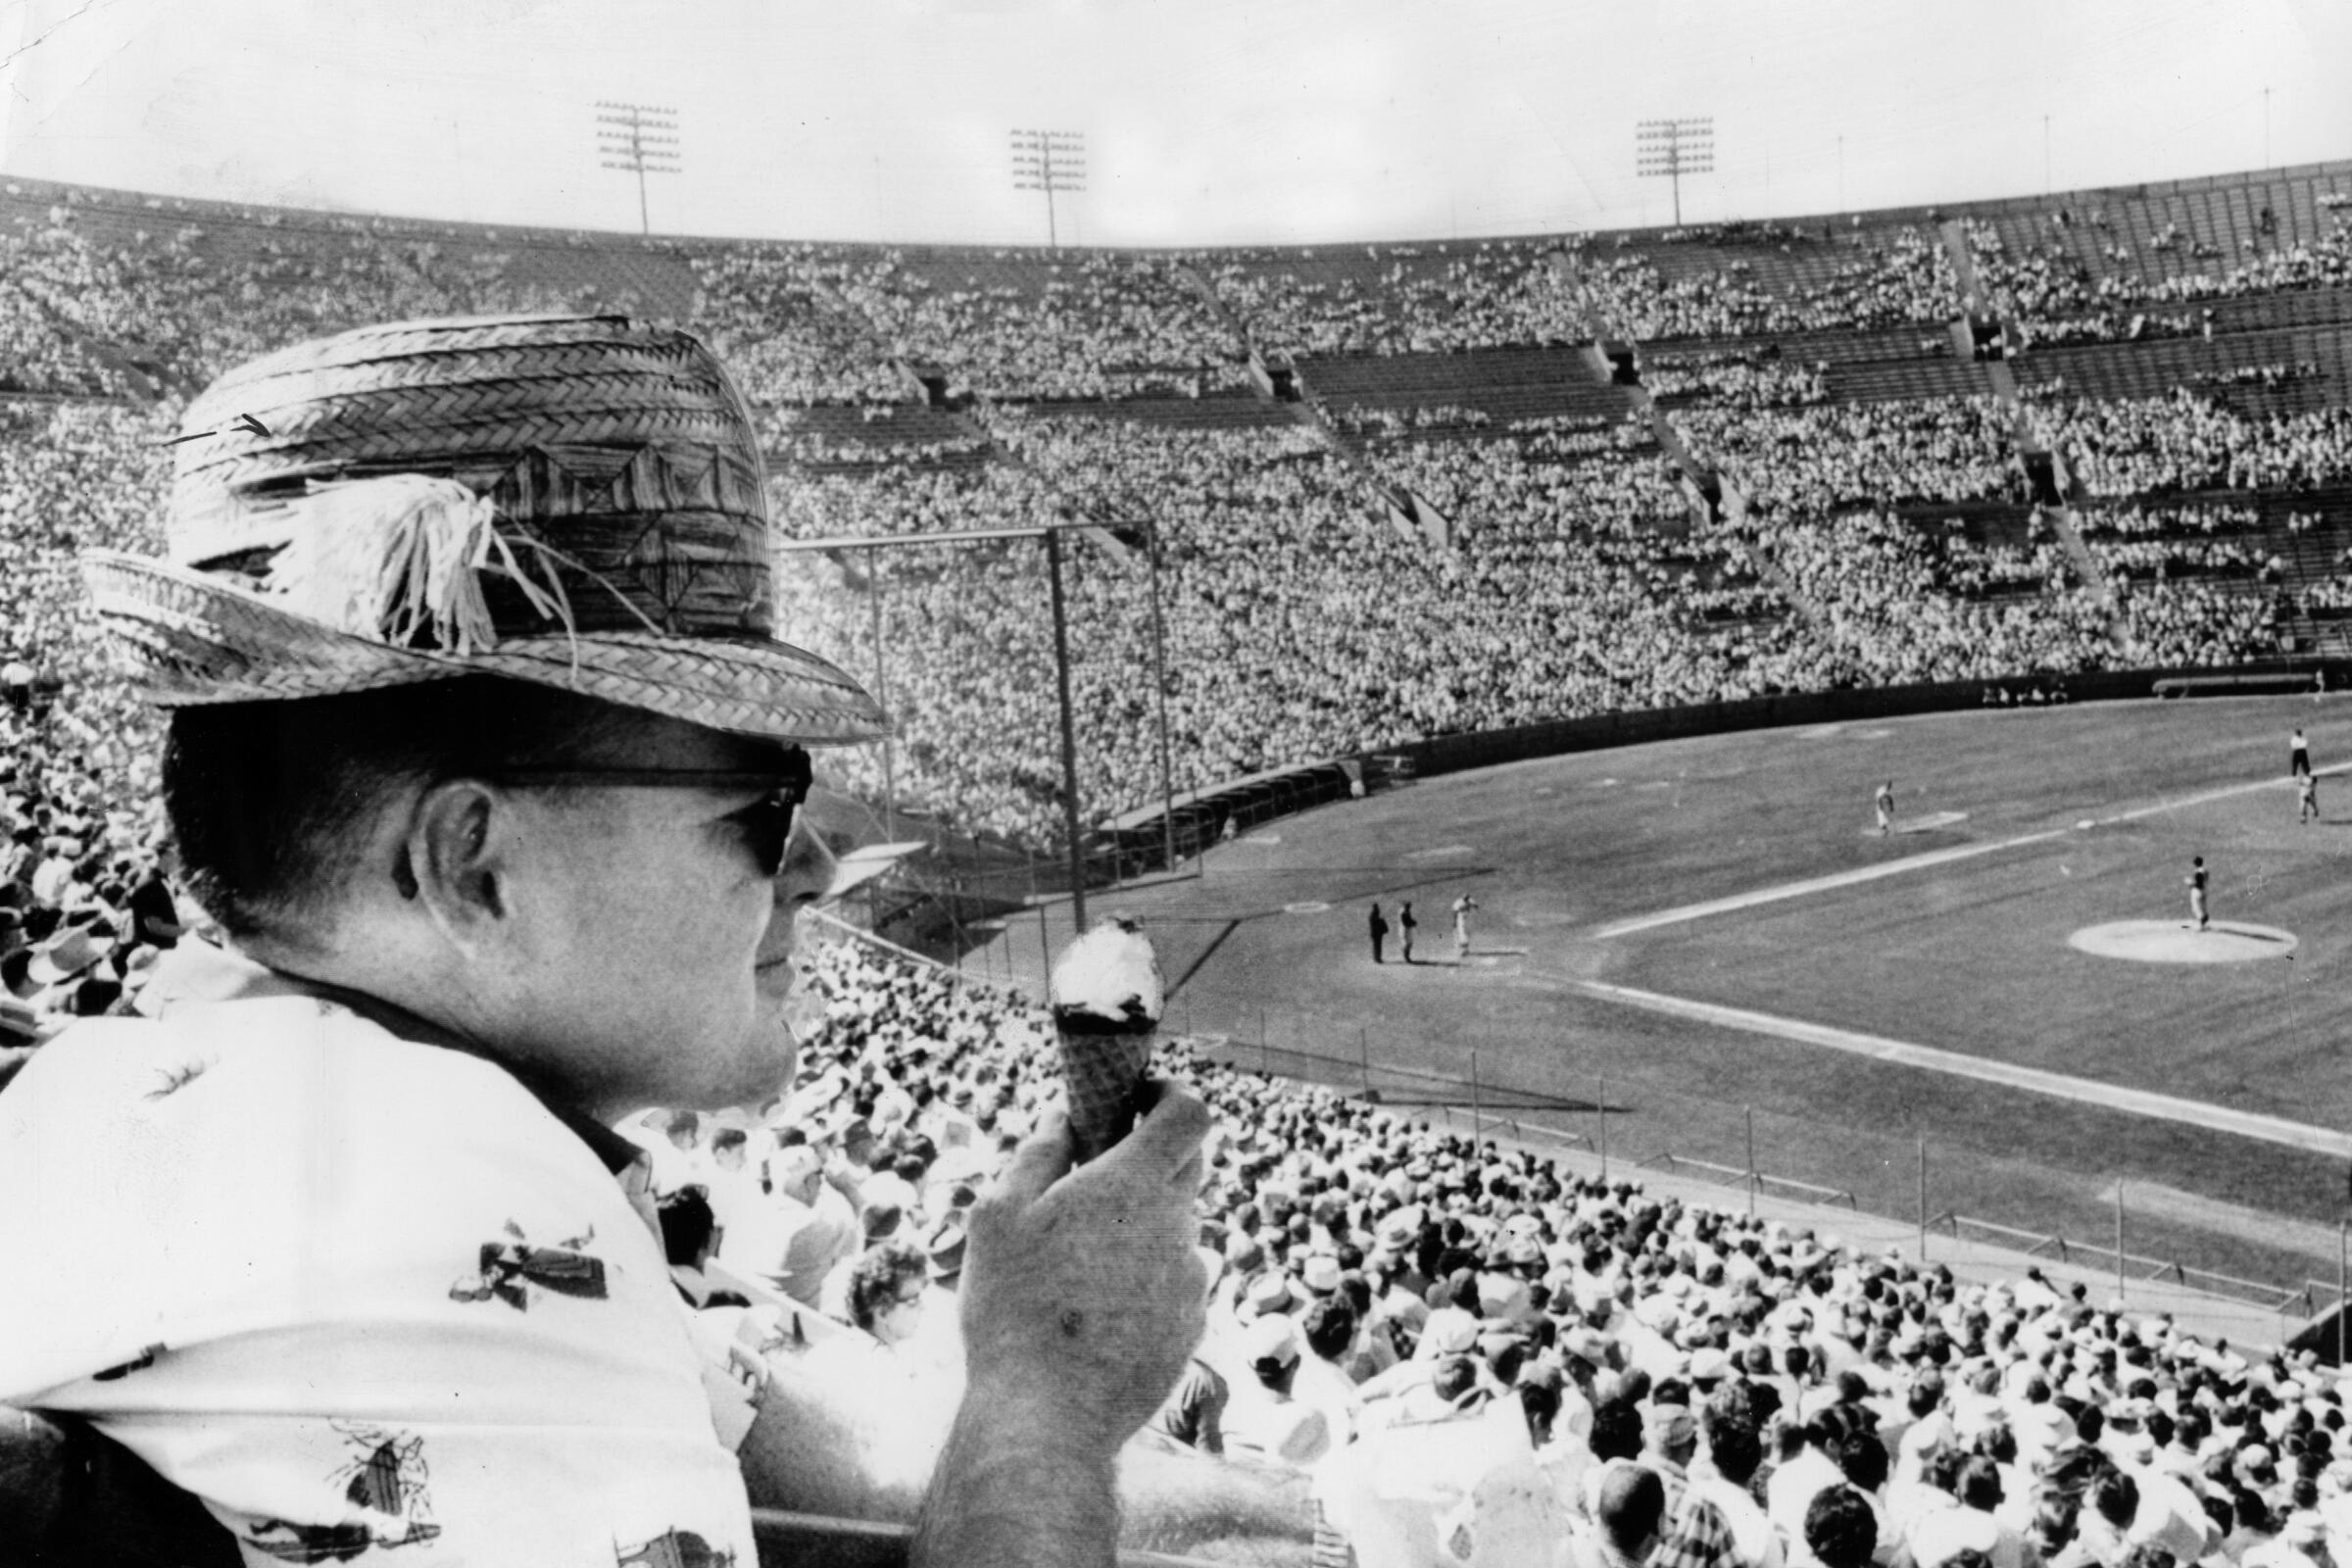 A Dodgers fan eats ice cream cone during game in April 1961 at the Coliseum.